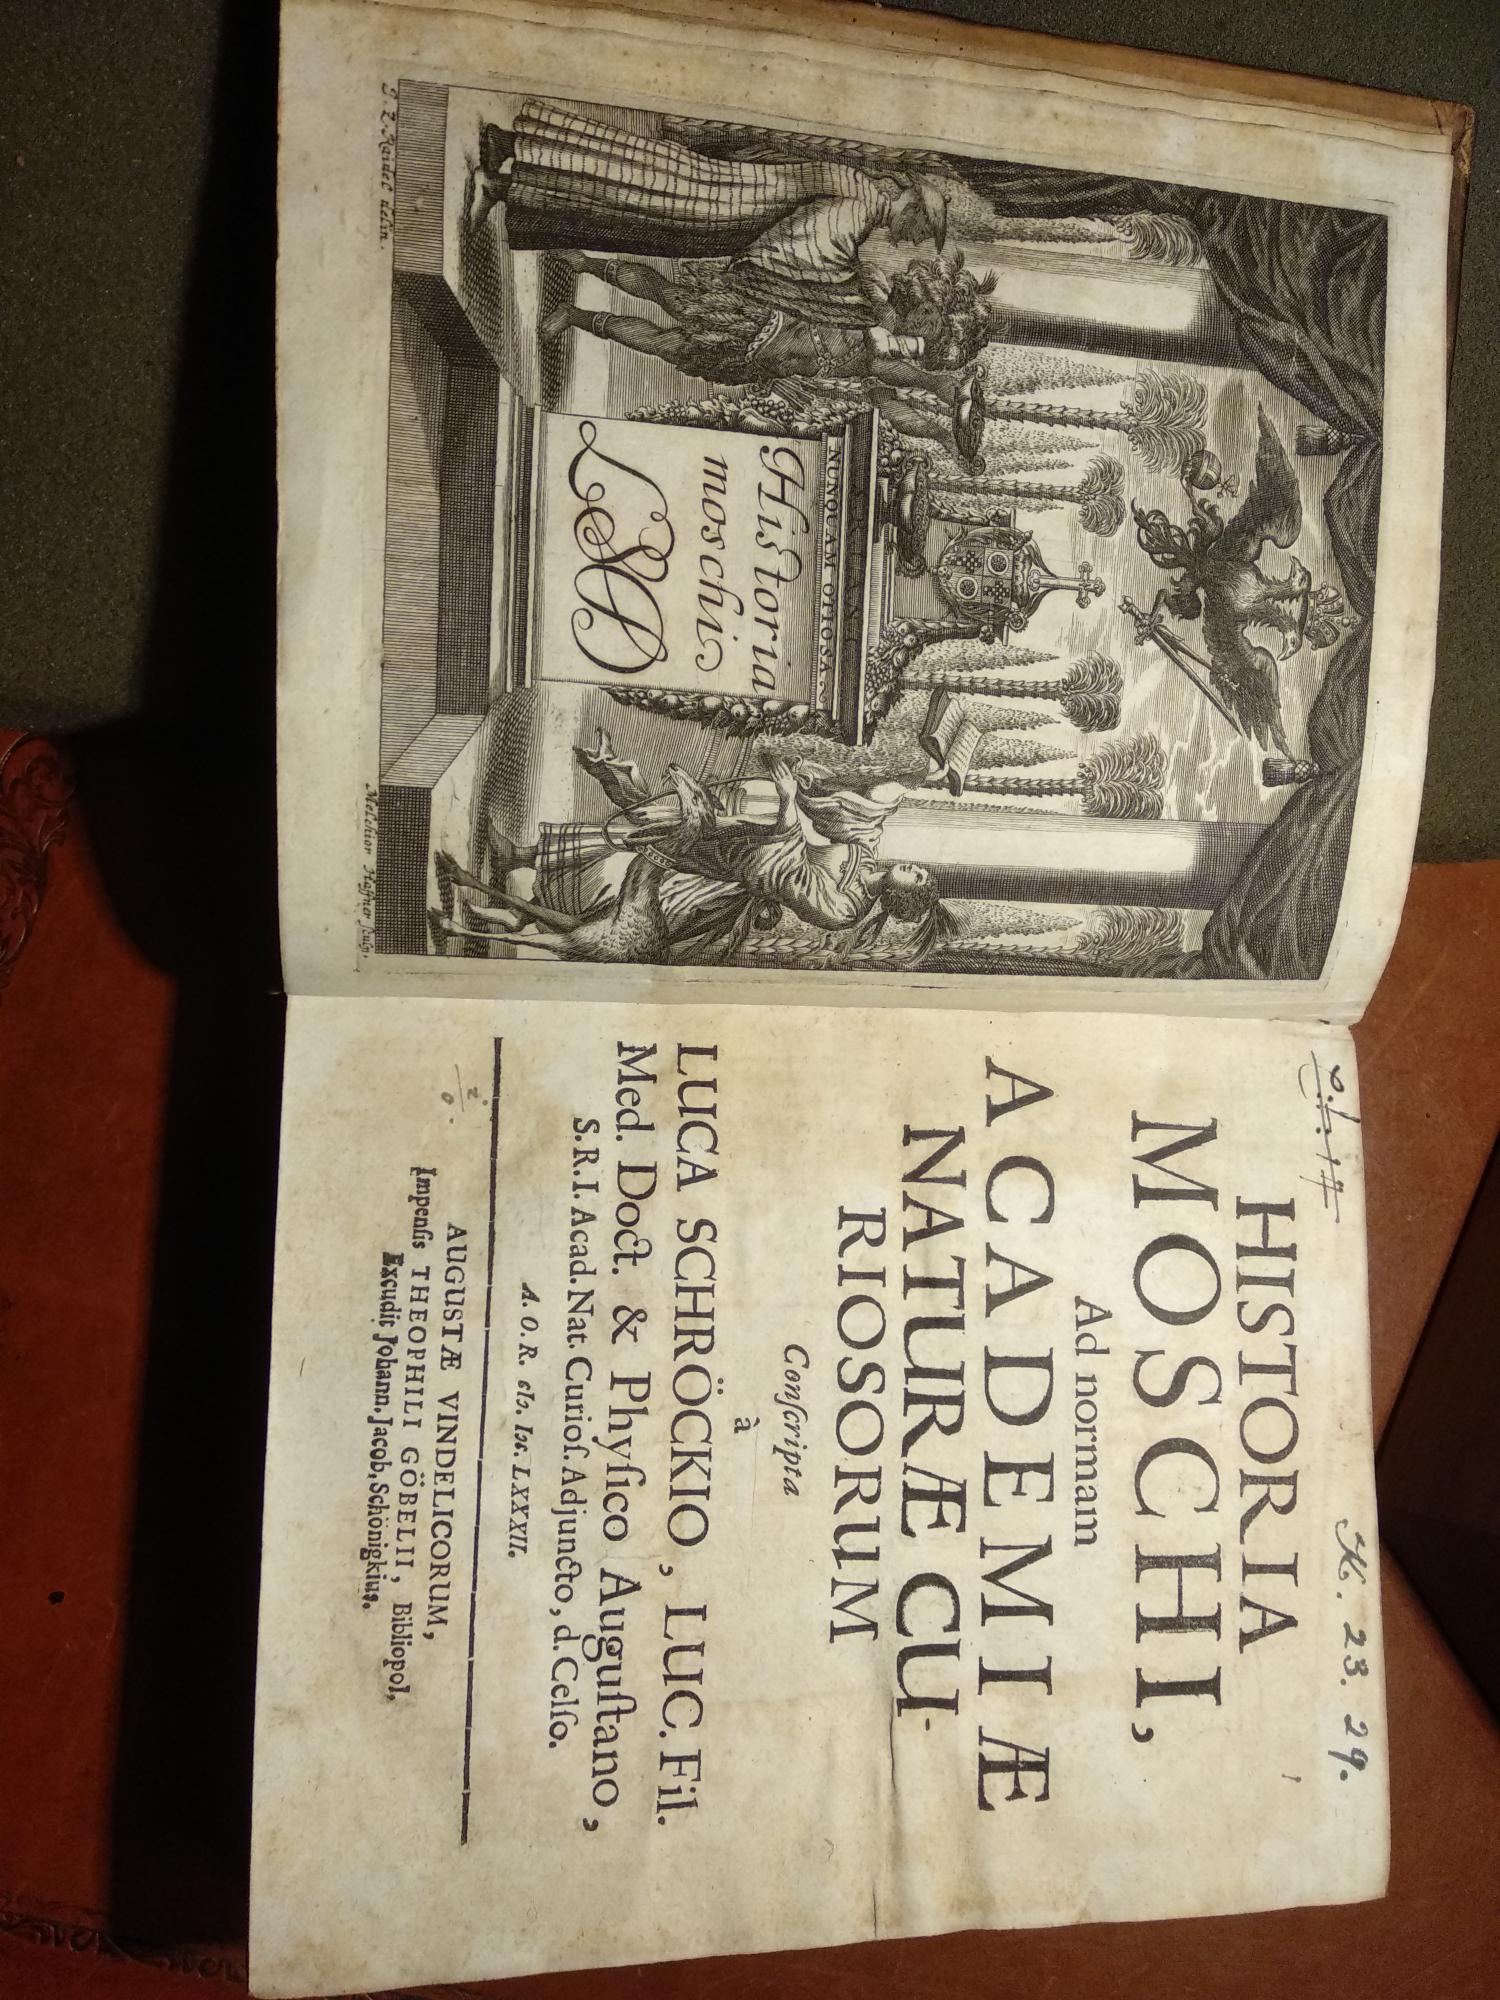 An image and title page for Historia Moschi